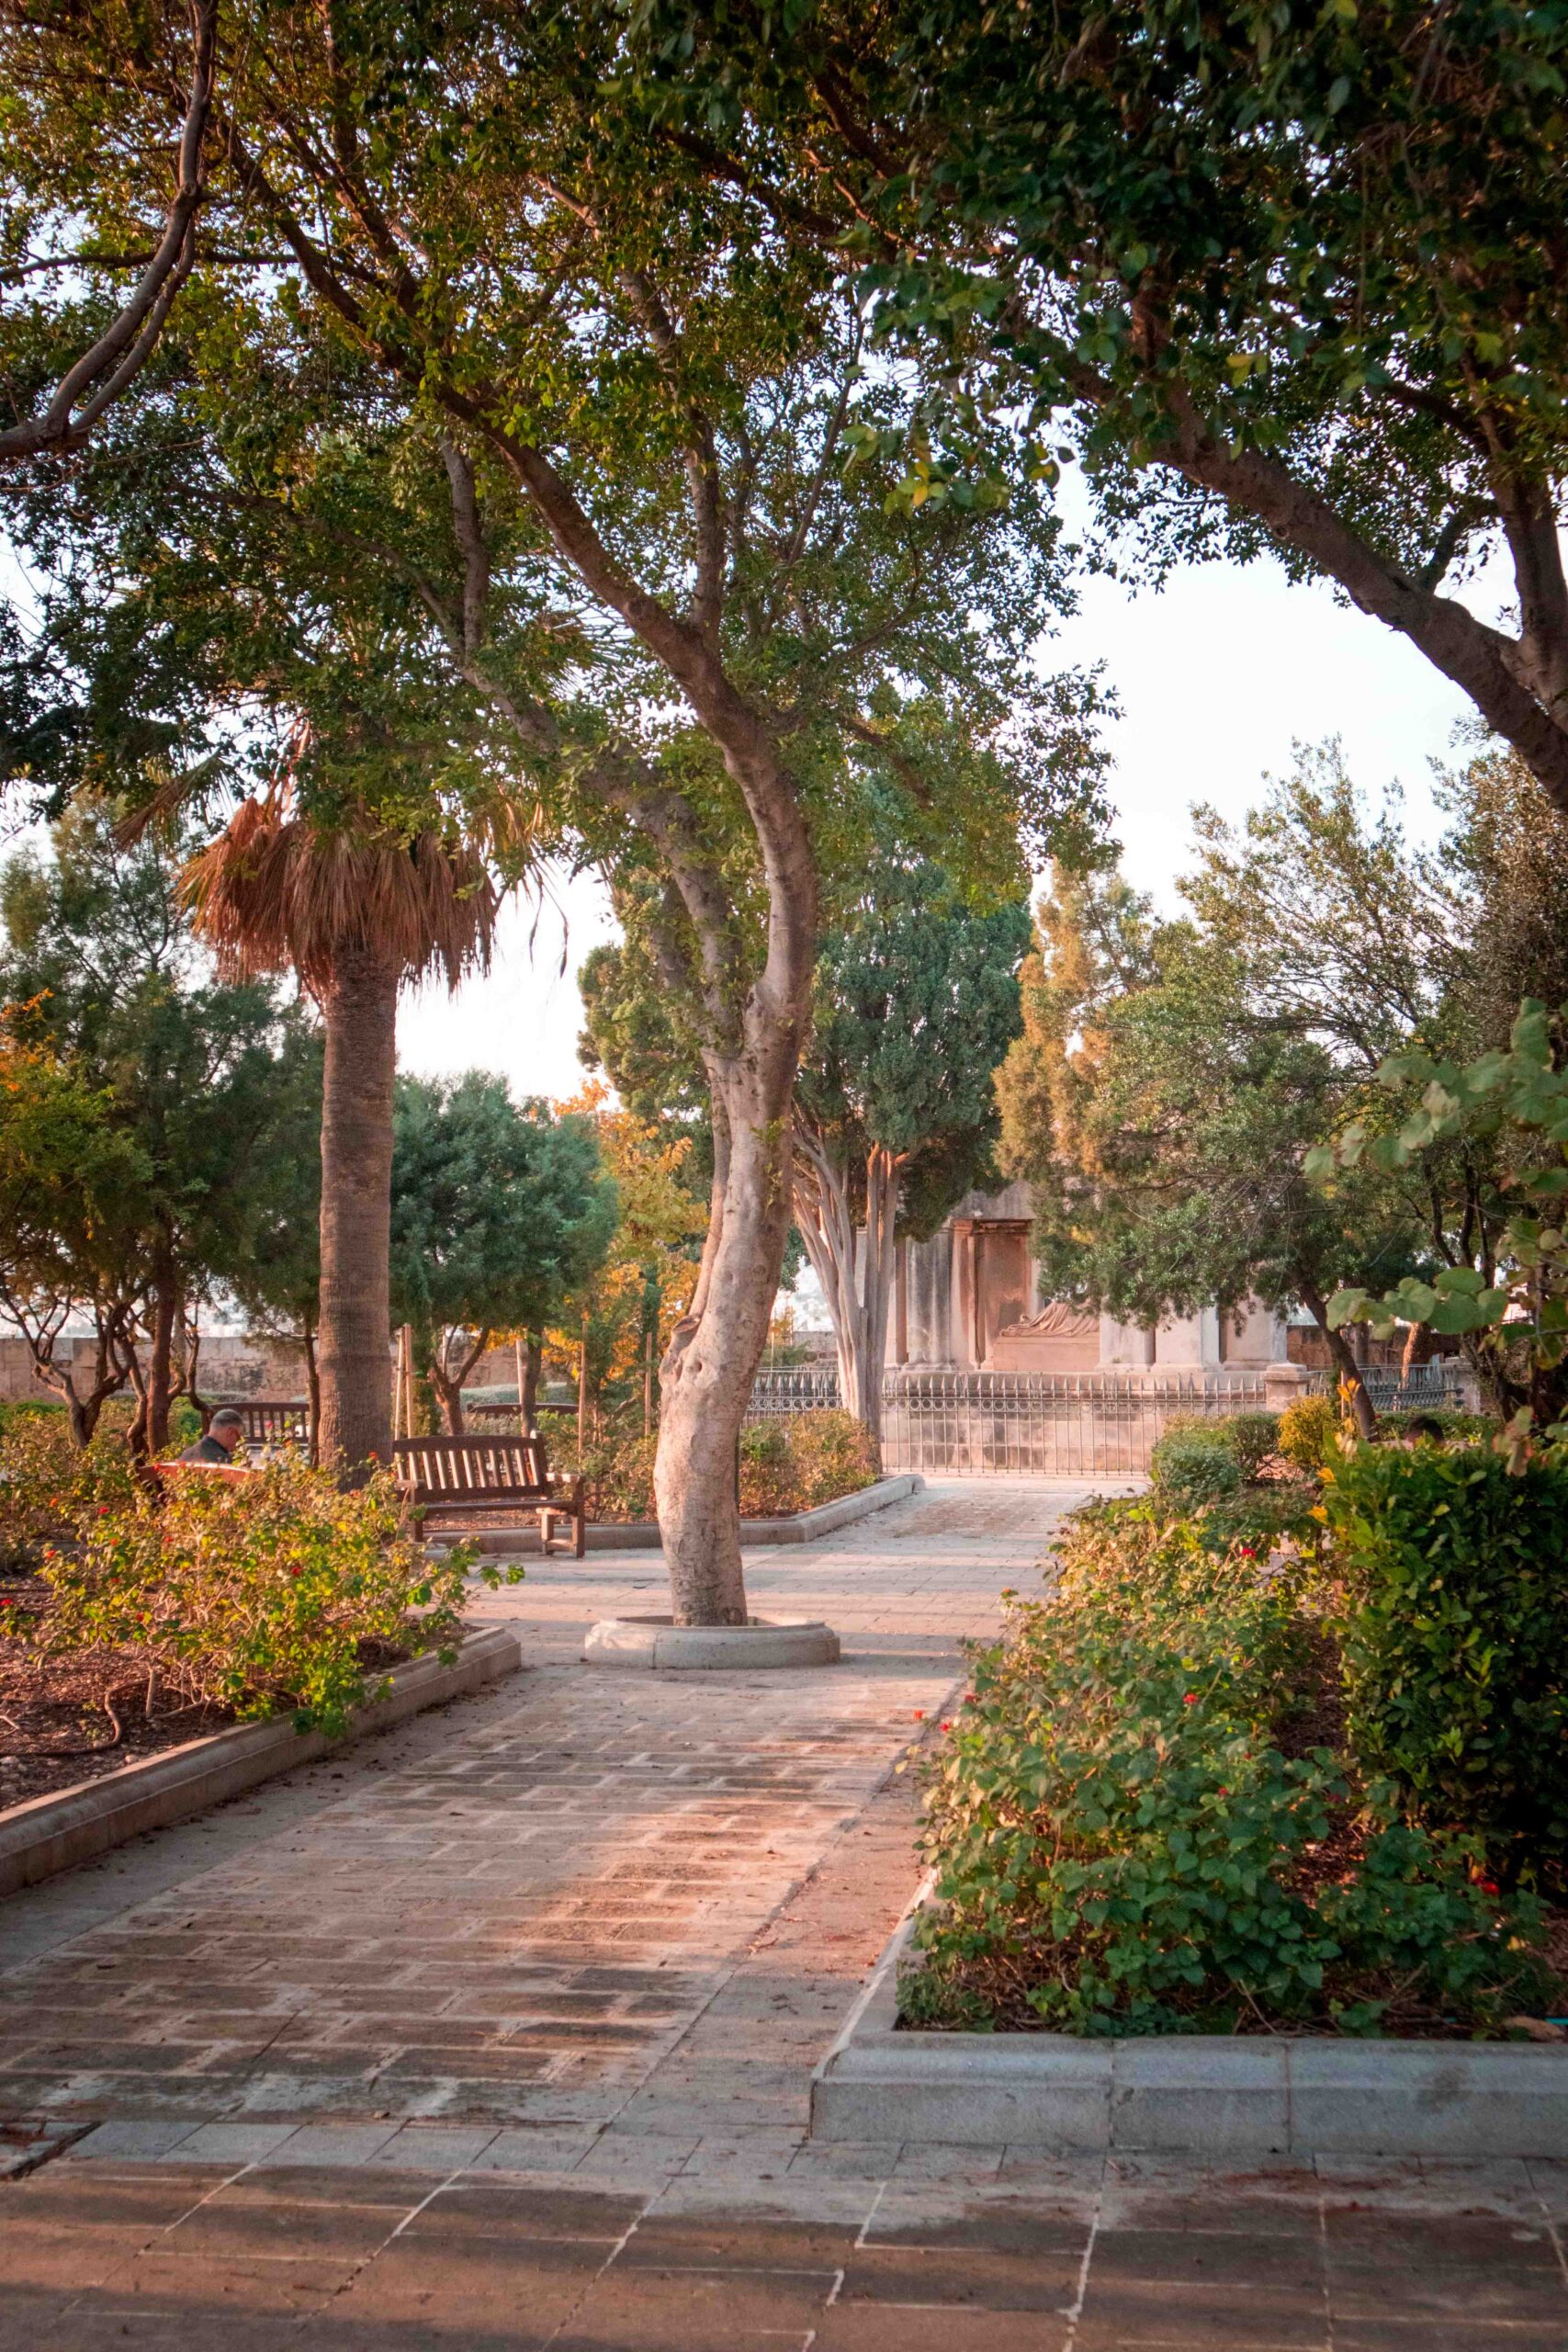 Alley with trees and vegetation leading to the Monument to Lord Hastings in the Hastings Garden in Valletta, Malta